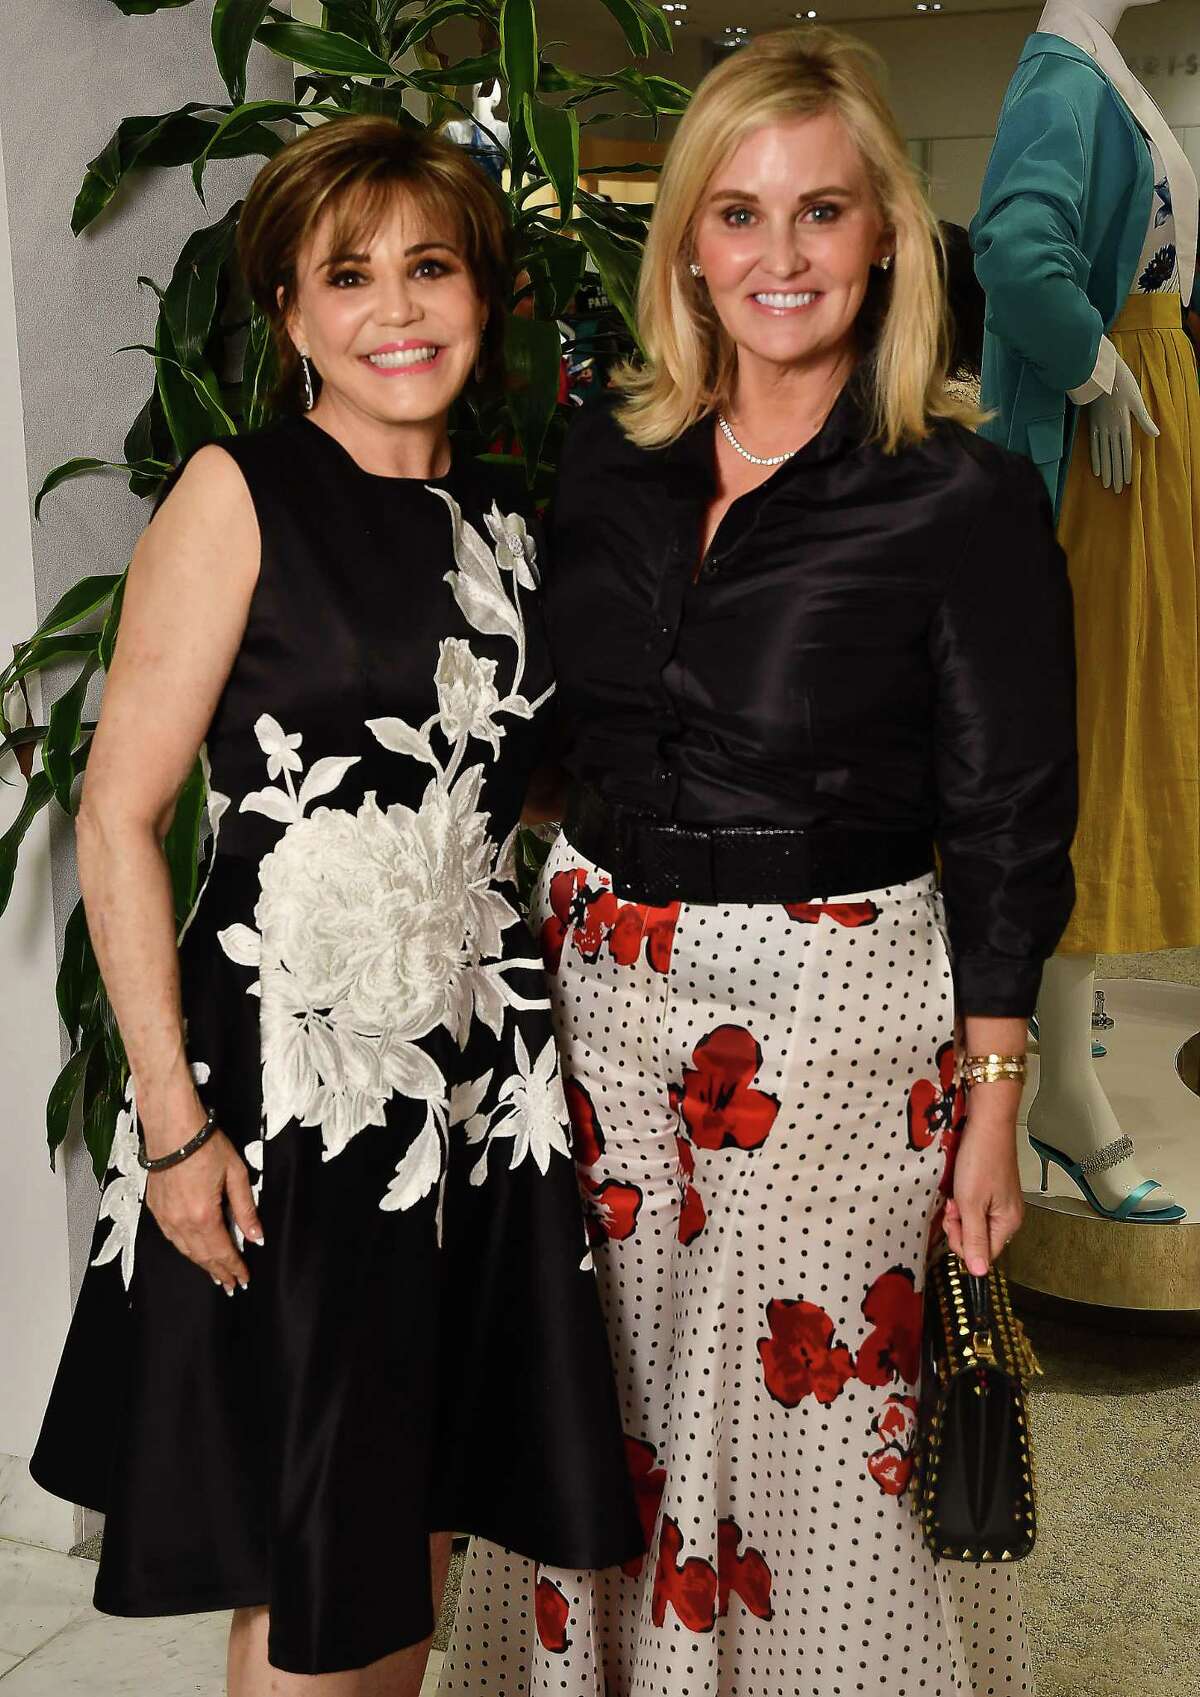 em>PaperCity</em> Best Dressed Honorees Revealed at Buzzing Neiman